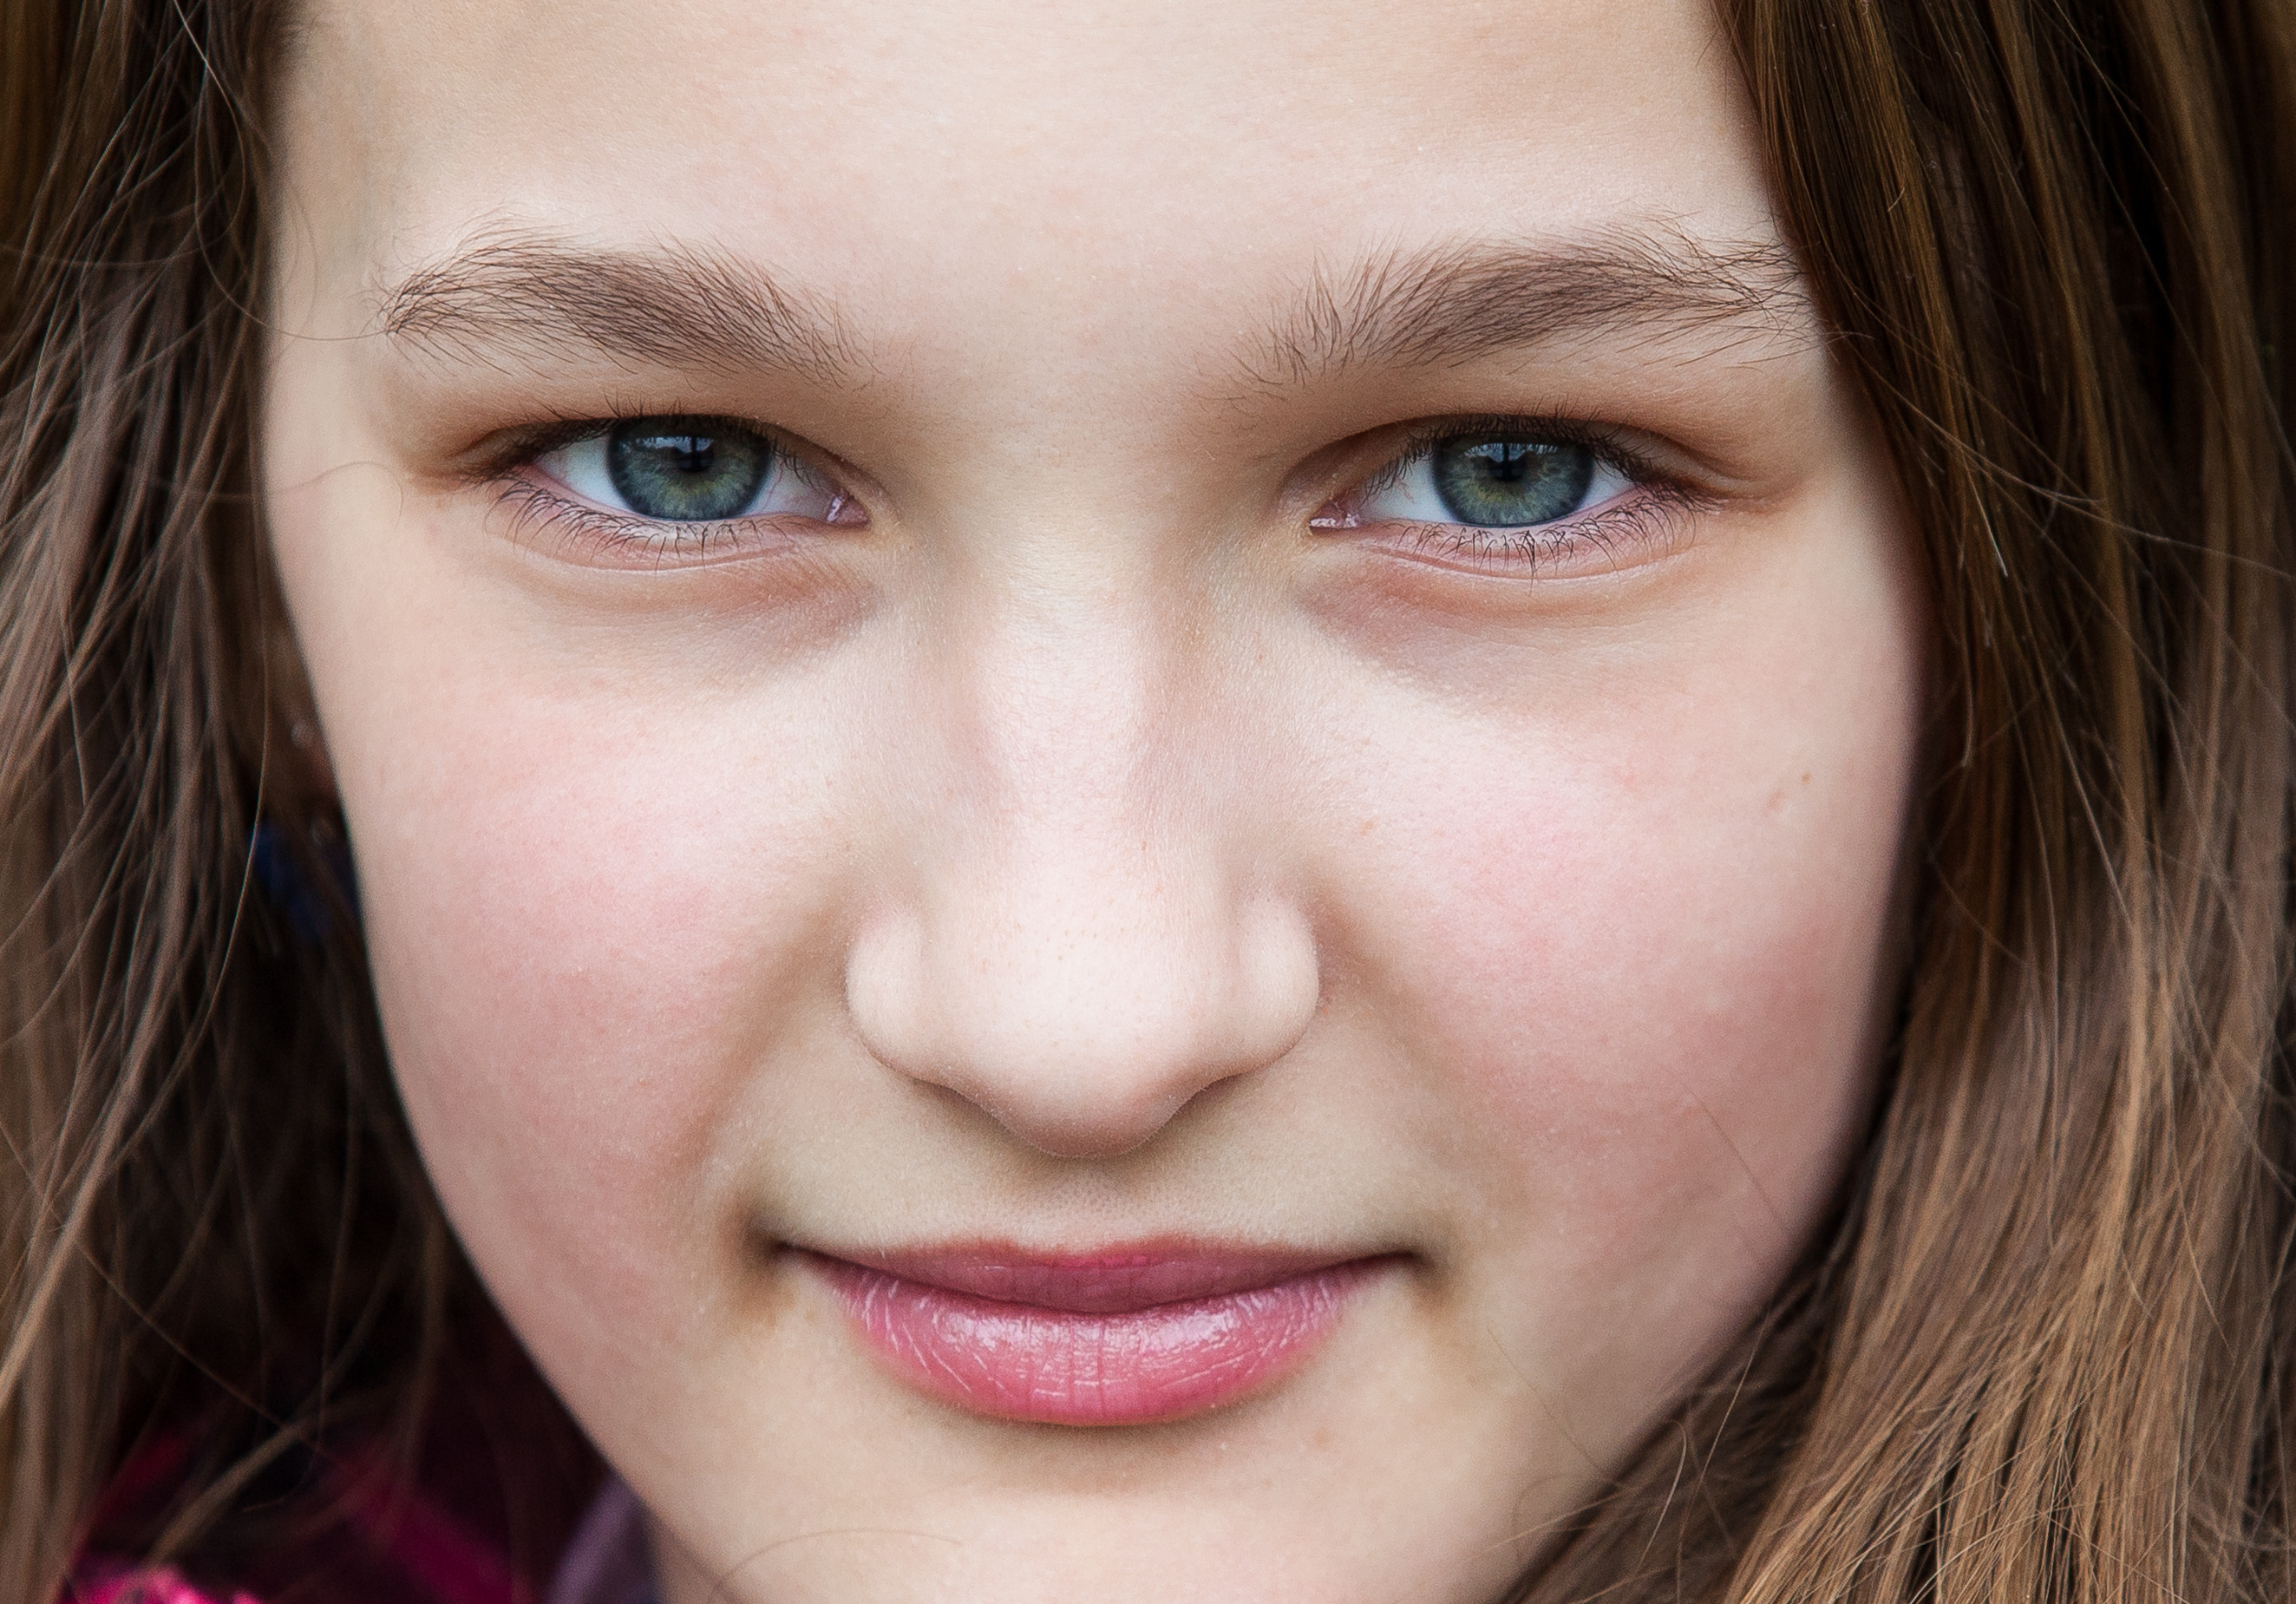 an amazingly beautiful Catholic 12-year-old girl photographed in April 2014, picture 27, cropped